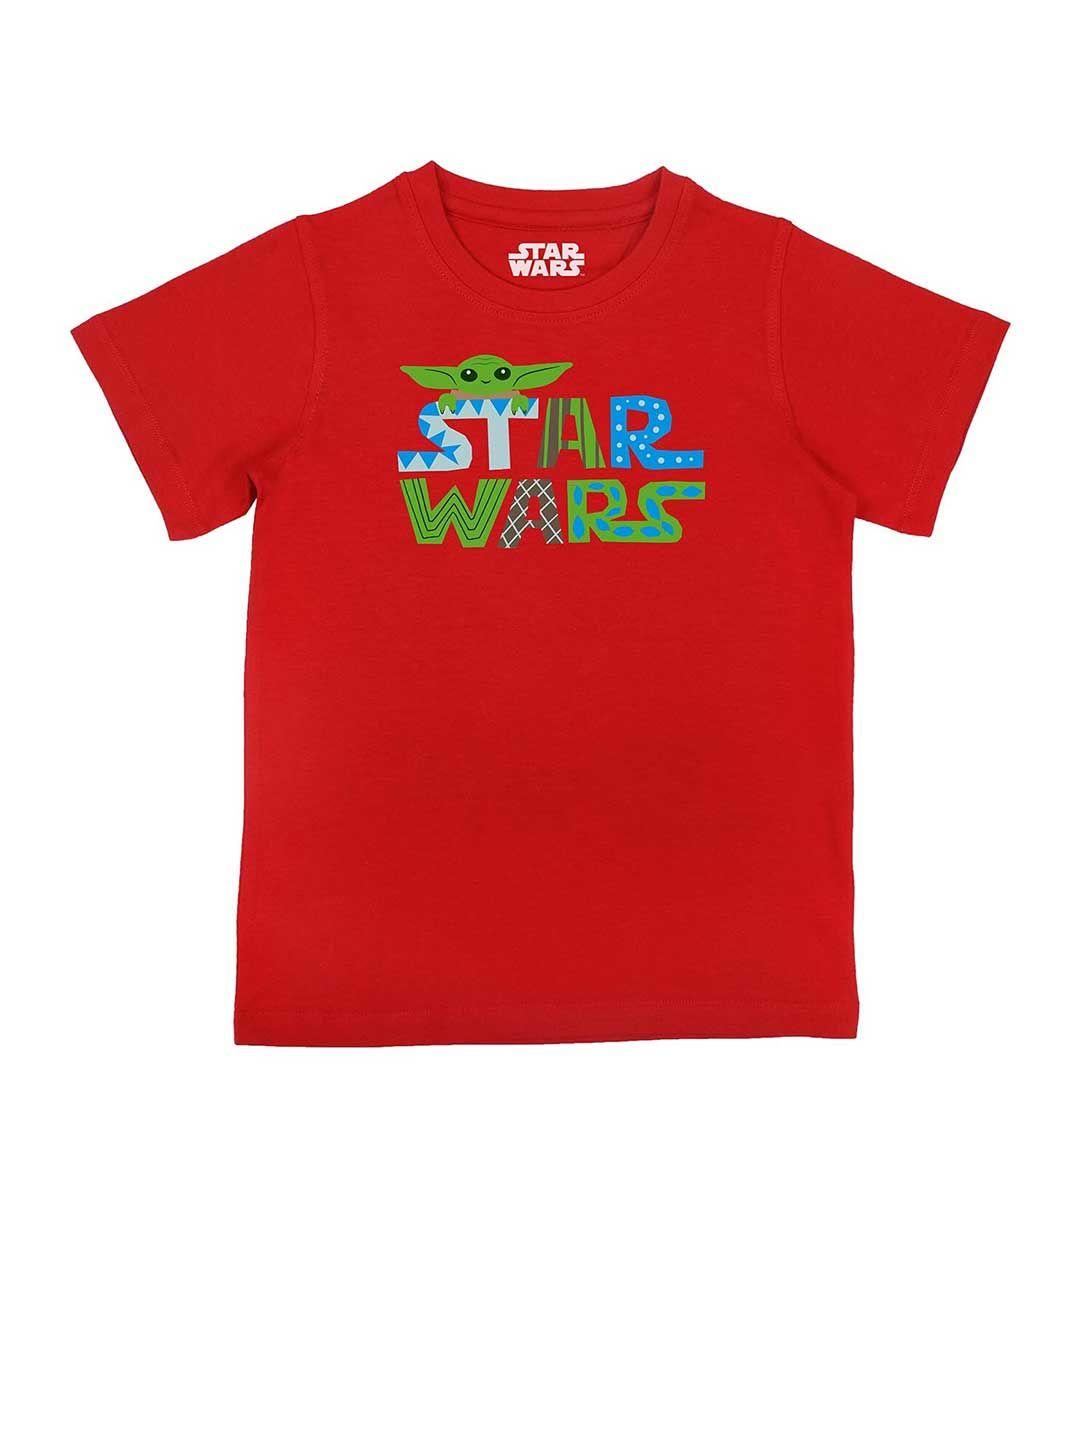 star-wars-by-wear-your-mind-boys-red-typography-printed-applique-t-shirt